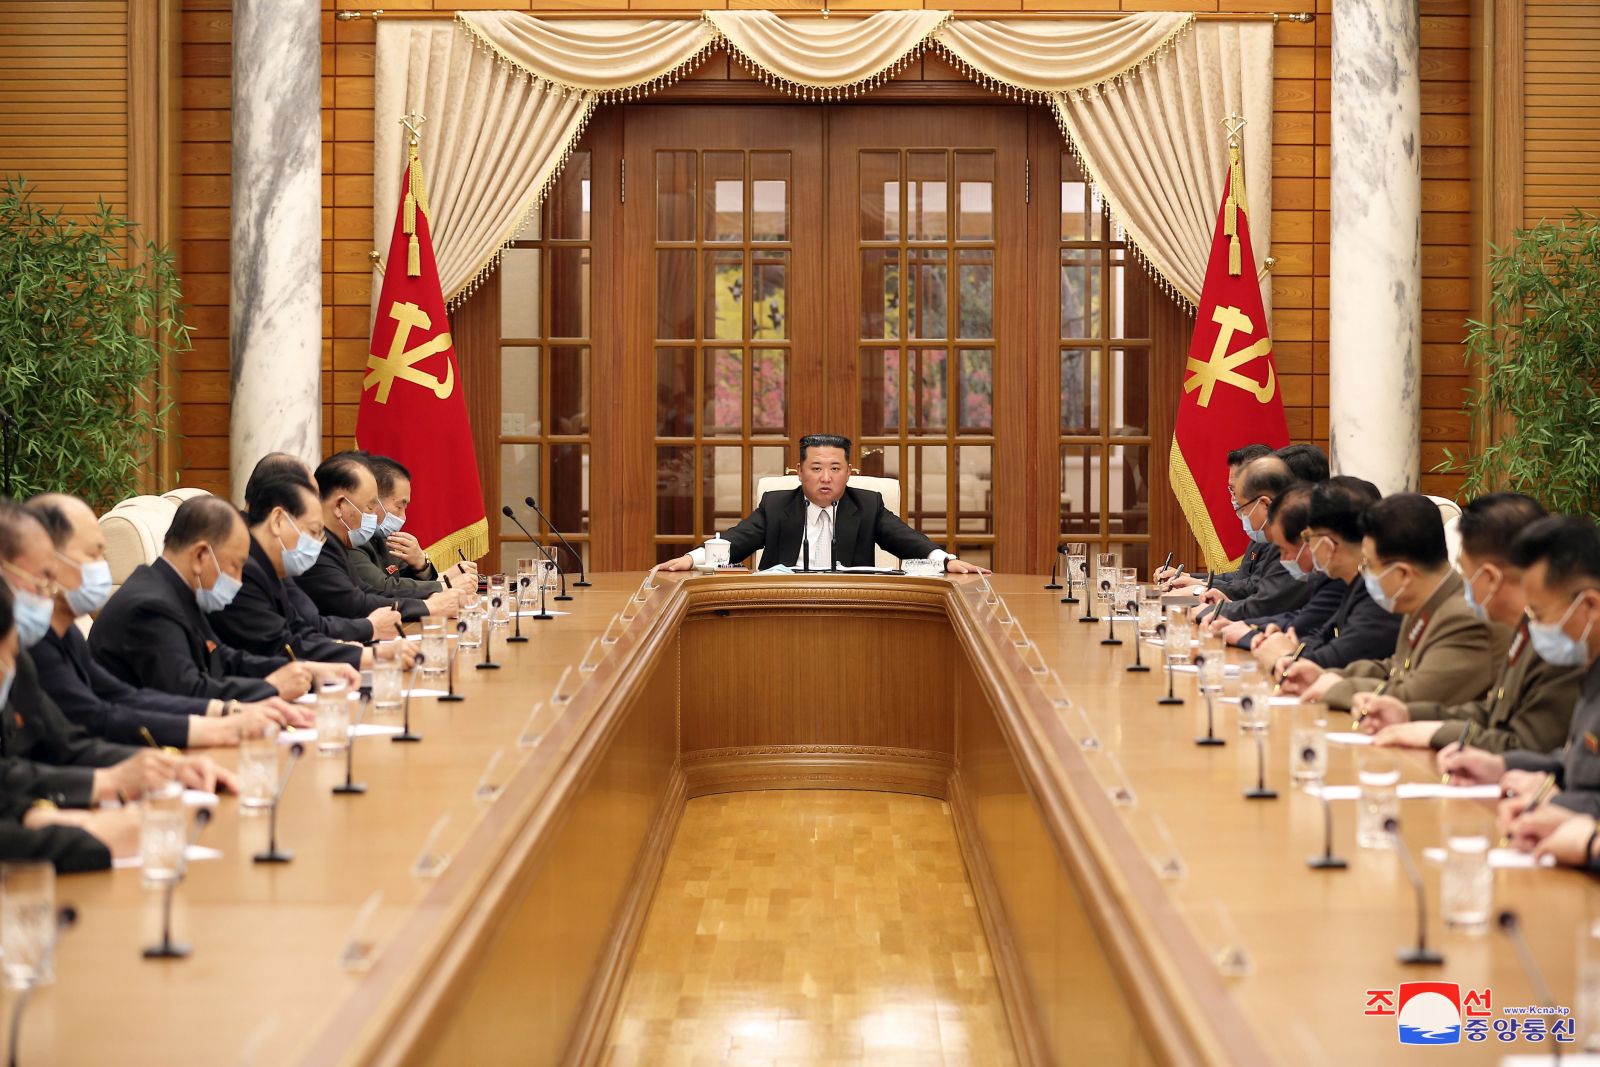 epa09941460 A photo released by the official North Korean Central News Agency (KCNA) shows the meeting of the 8th Political Bureau of 8th Central Committee of the WPK, convened at the office building of the Party Central Committee in Pyongyang, North Korea, 12 May 2022. Kim Jong-un (C), general secretary of the Workers' Party of Korea (WPK), presented at the meeting, held to organize the government's response to an outbreak of COVID-19 in Pyongyang.  EPA/KCNA   EDITORIAL USE ONLY